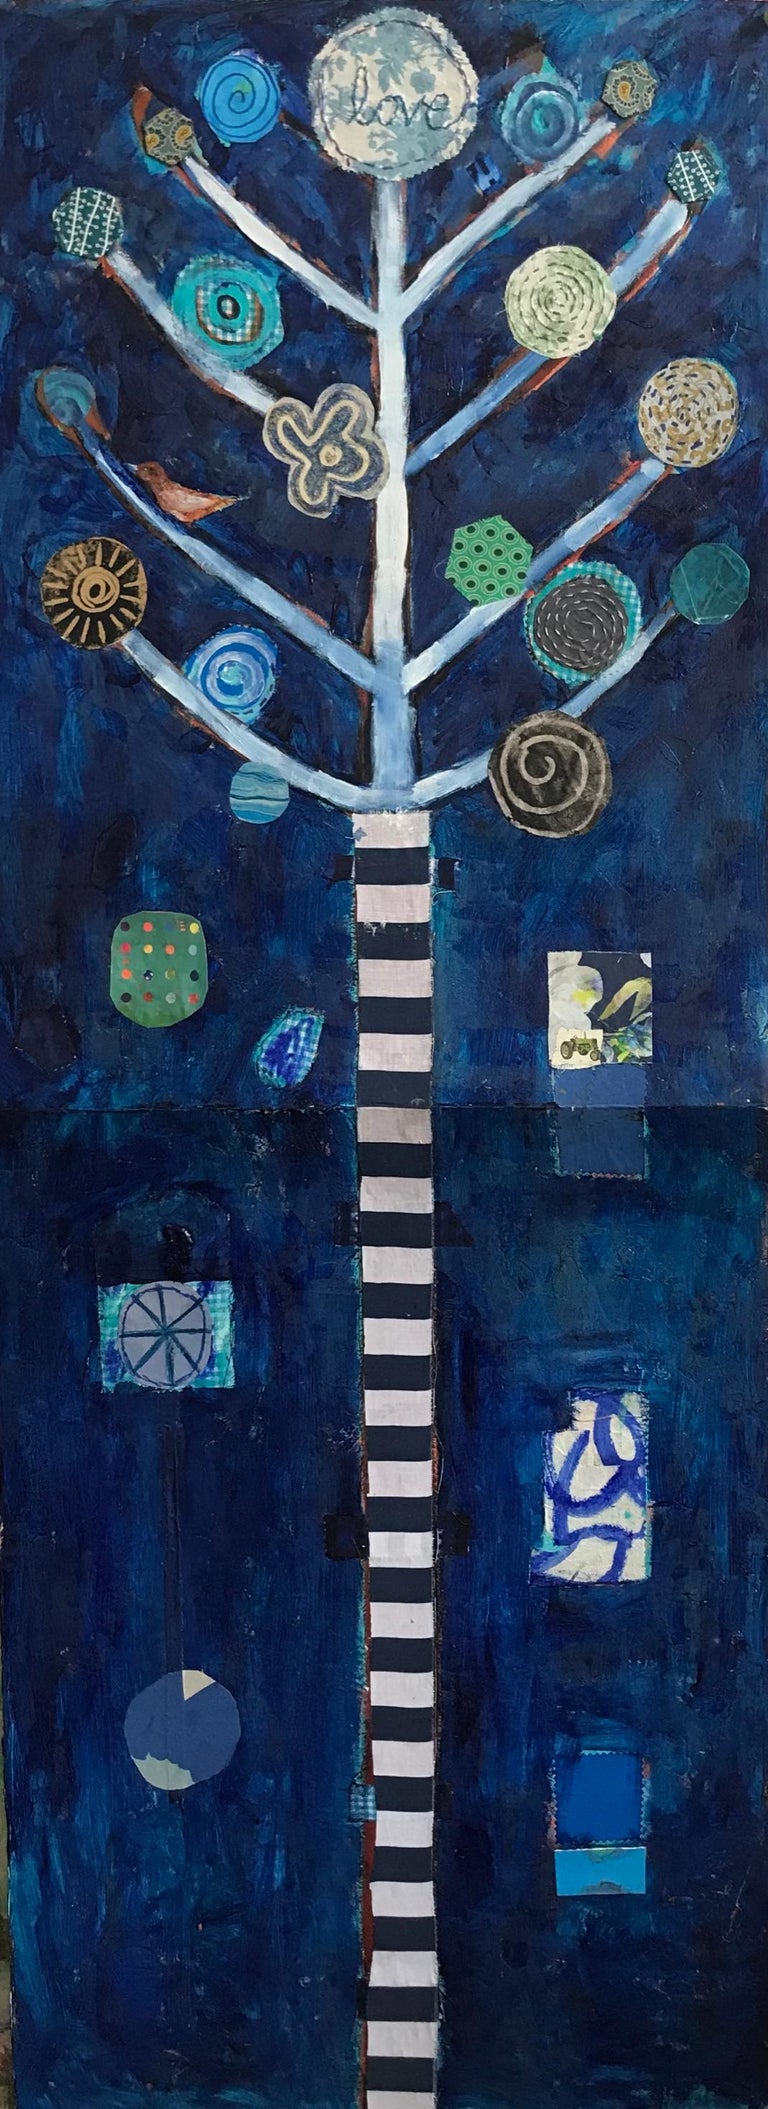 Blue Tree of Life Mixed Media Acrylic Painting on paper - Abstract Expressionist Mixed Media Art by Pam Smilow